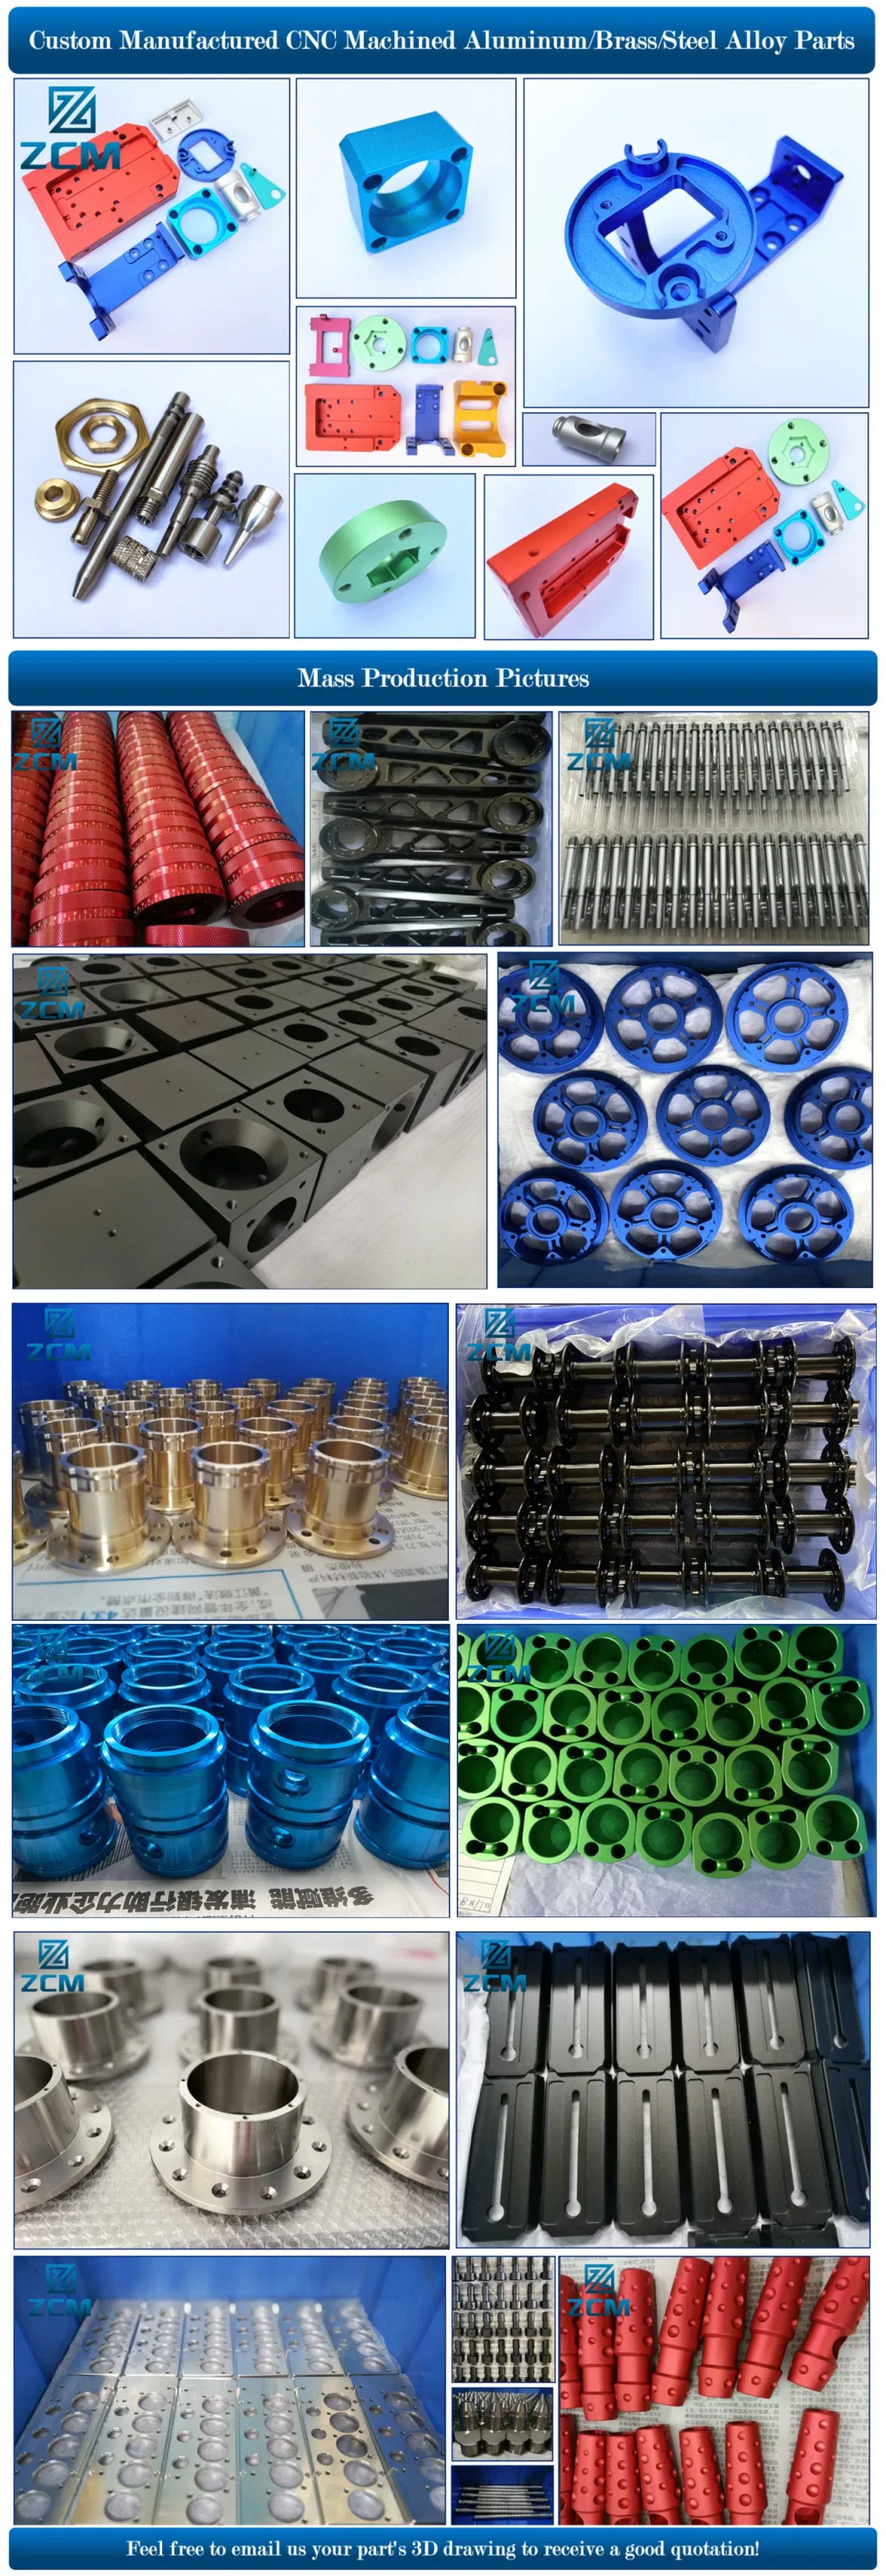 Shenzhen Custom Made Metal Ship/Boat/Aircraft Parts Manufacturing CNC Machined Aluminum Alloy Rapid Prototype/Prototyping Service